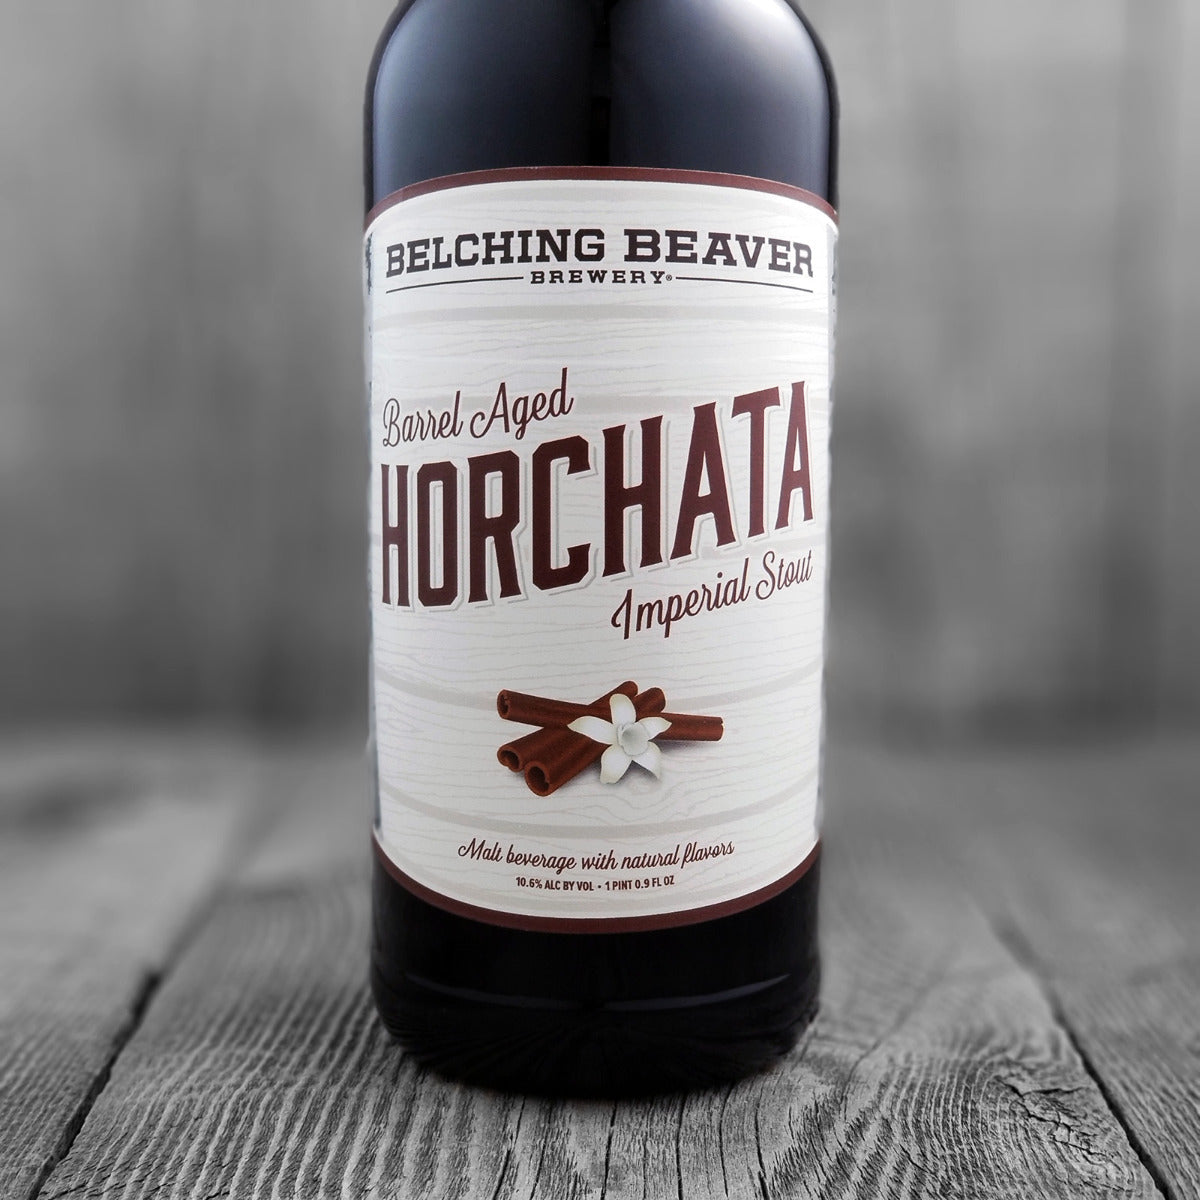 Belching Beaver Barrel Aged Horchata Imperial Stout